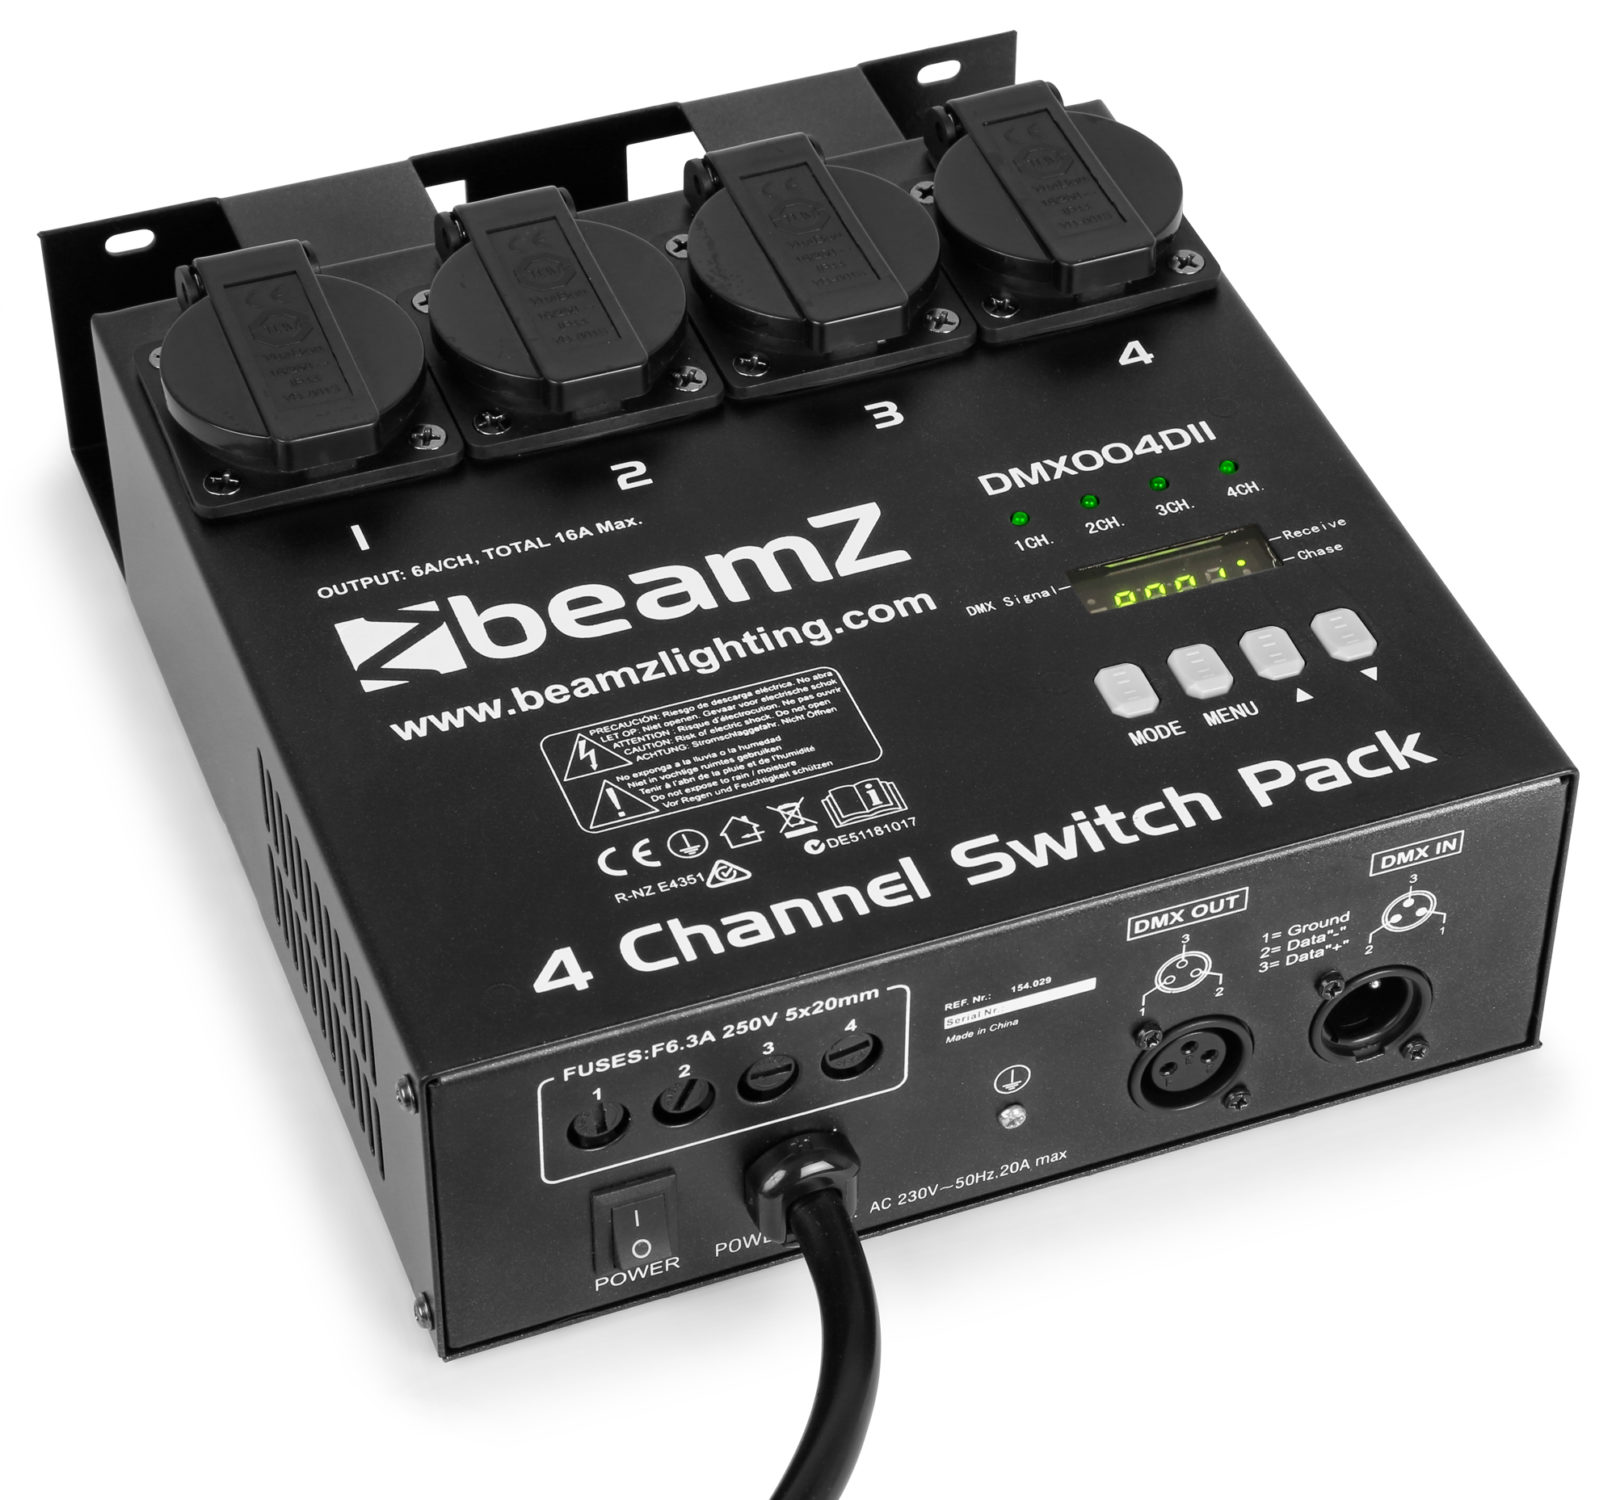 4-CHANNEL SWITCH PACK II beamZ